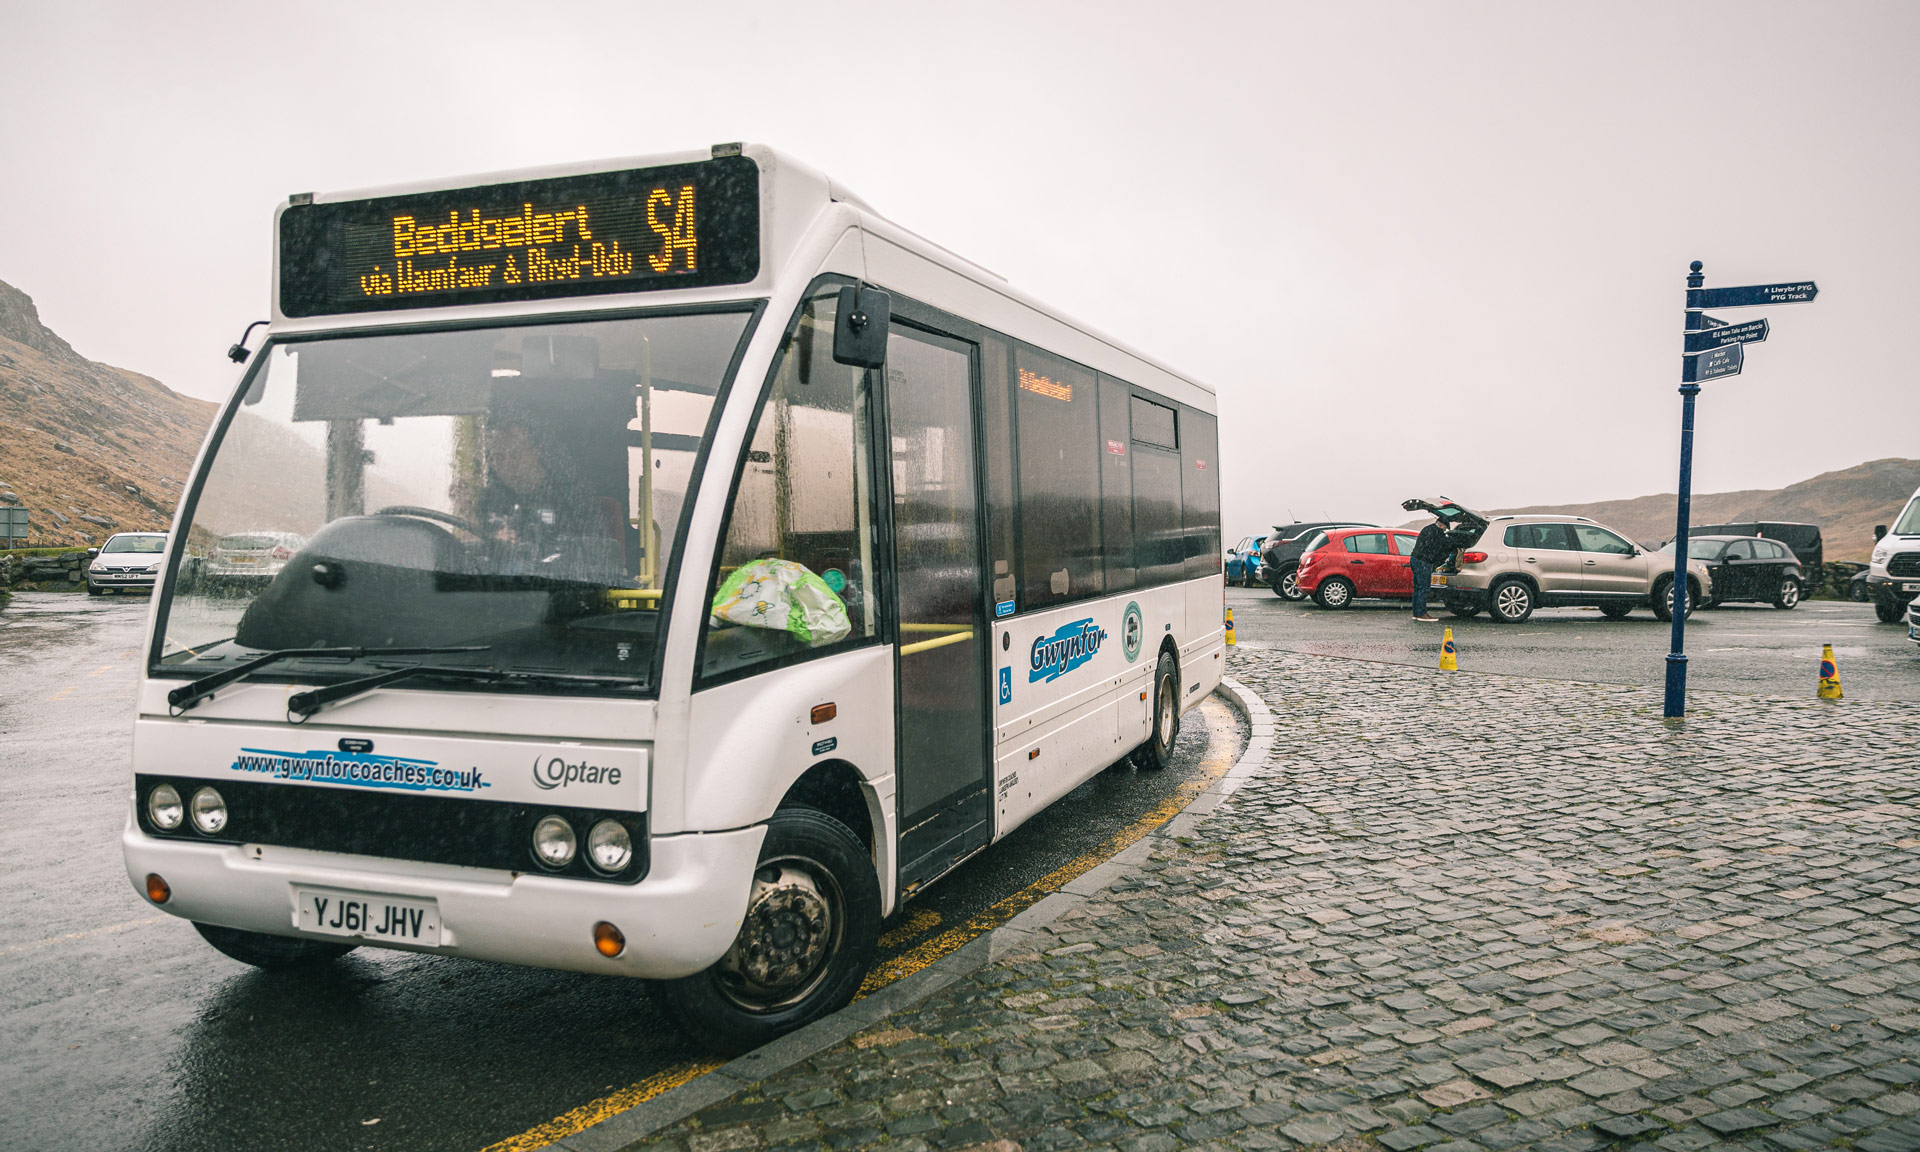 Snowdon Sherpa bus at the Pen y Pass stop